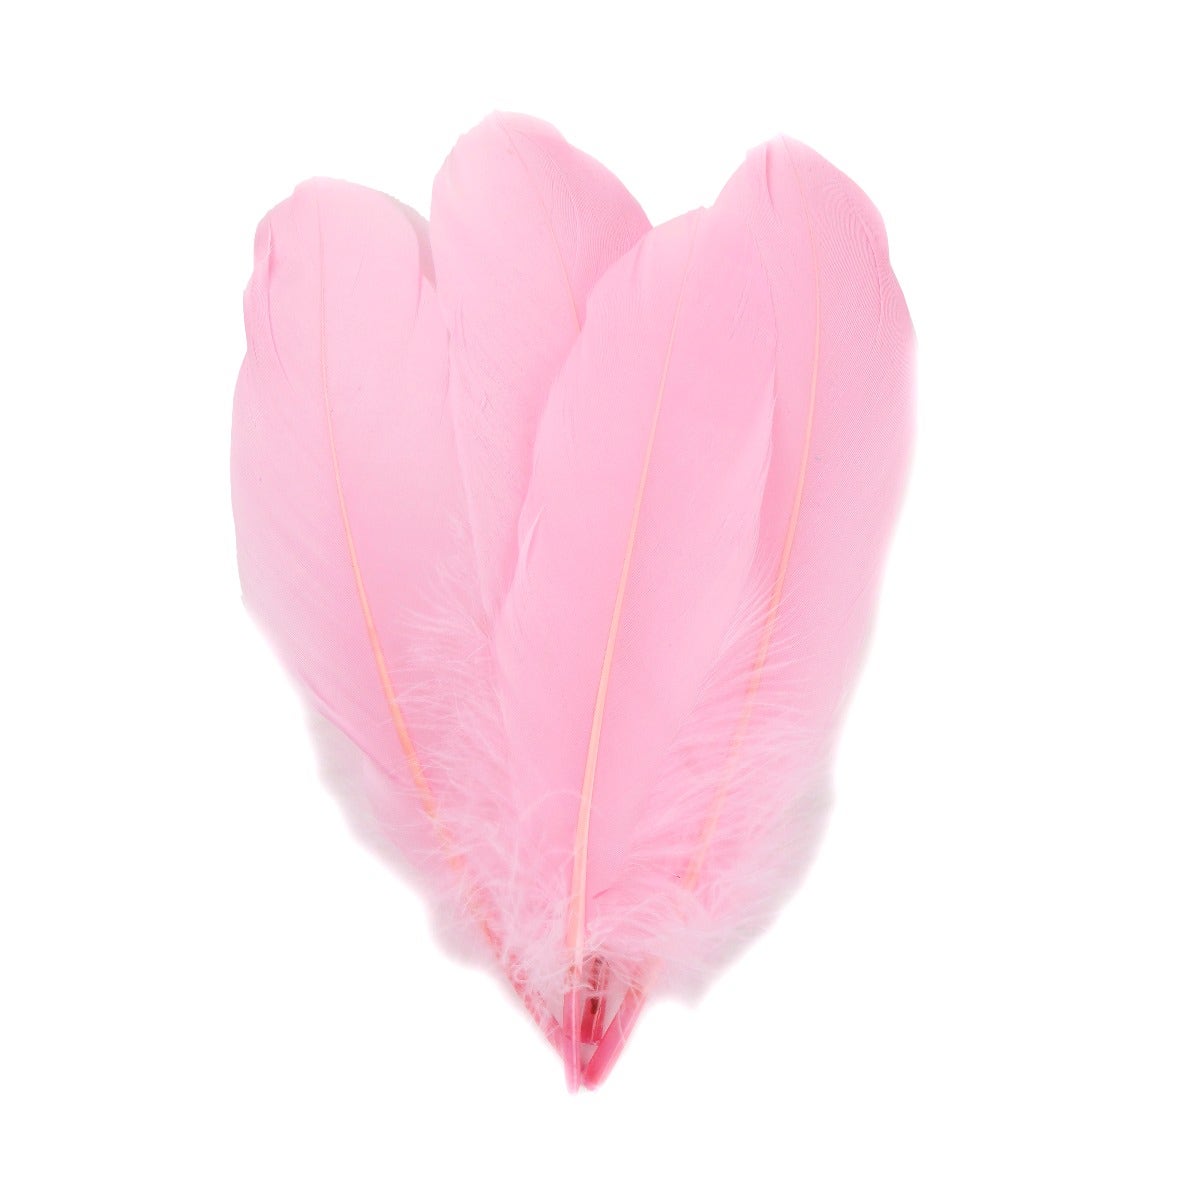 Goose Pallet Feathers 6-8" - 12 PC - Candy Pink